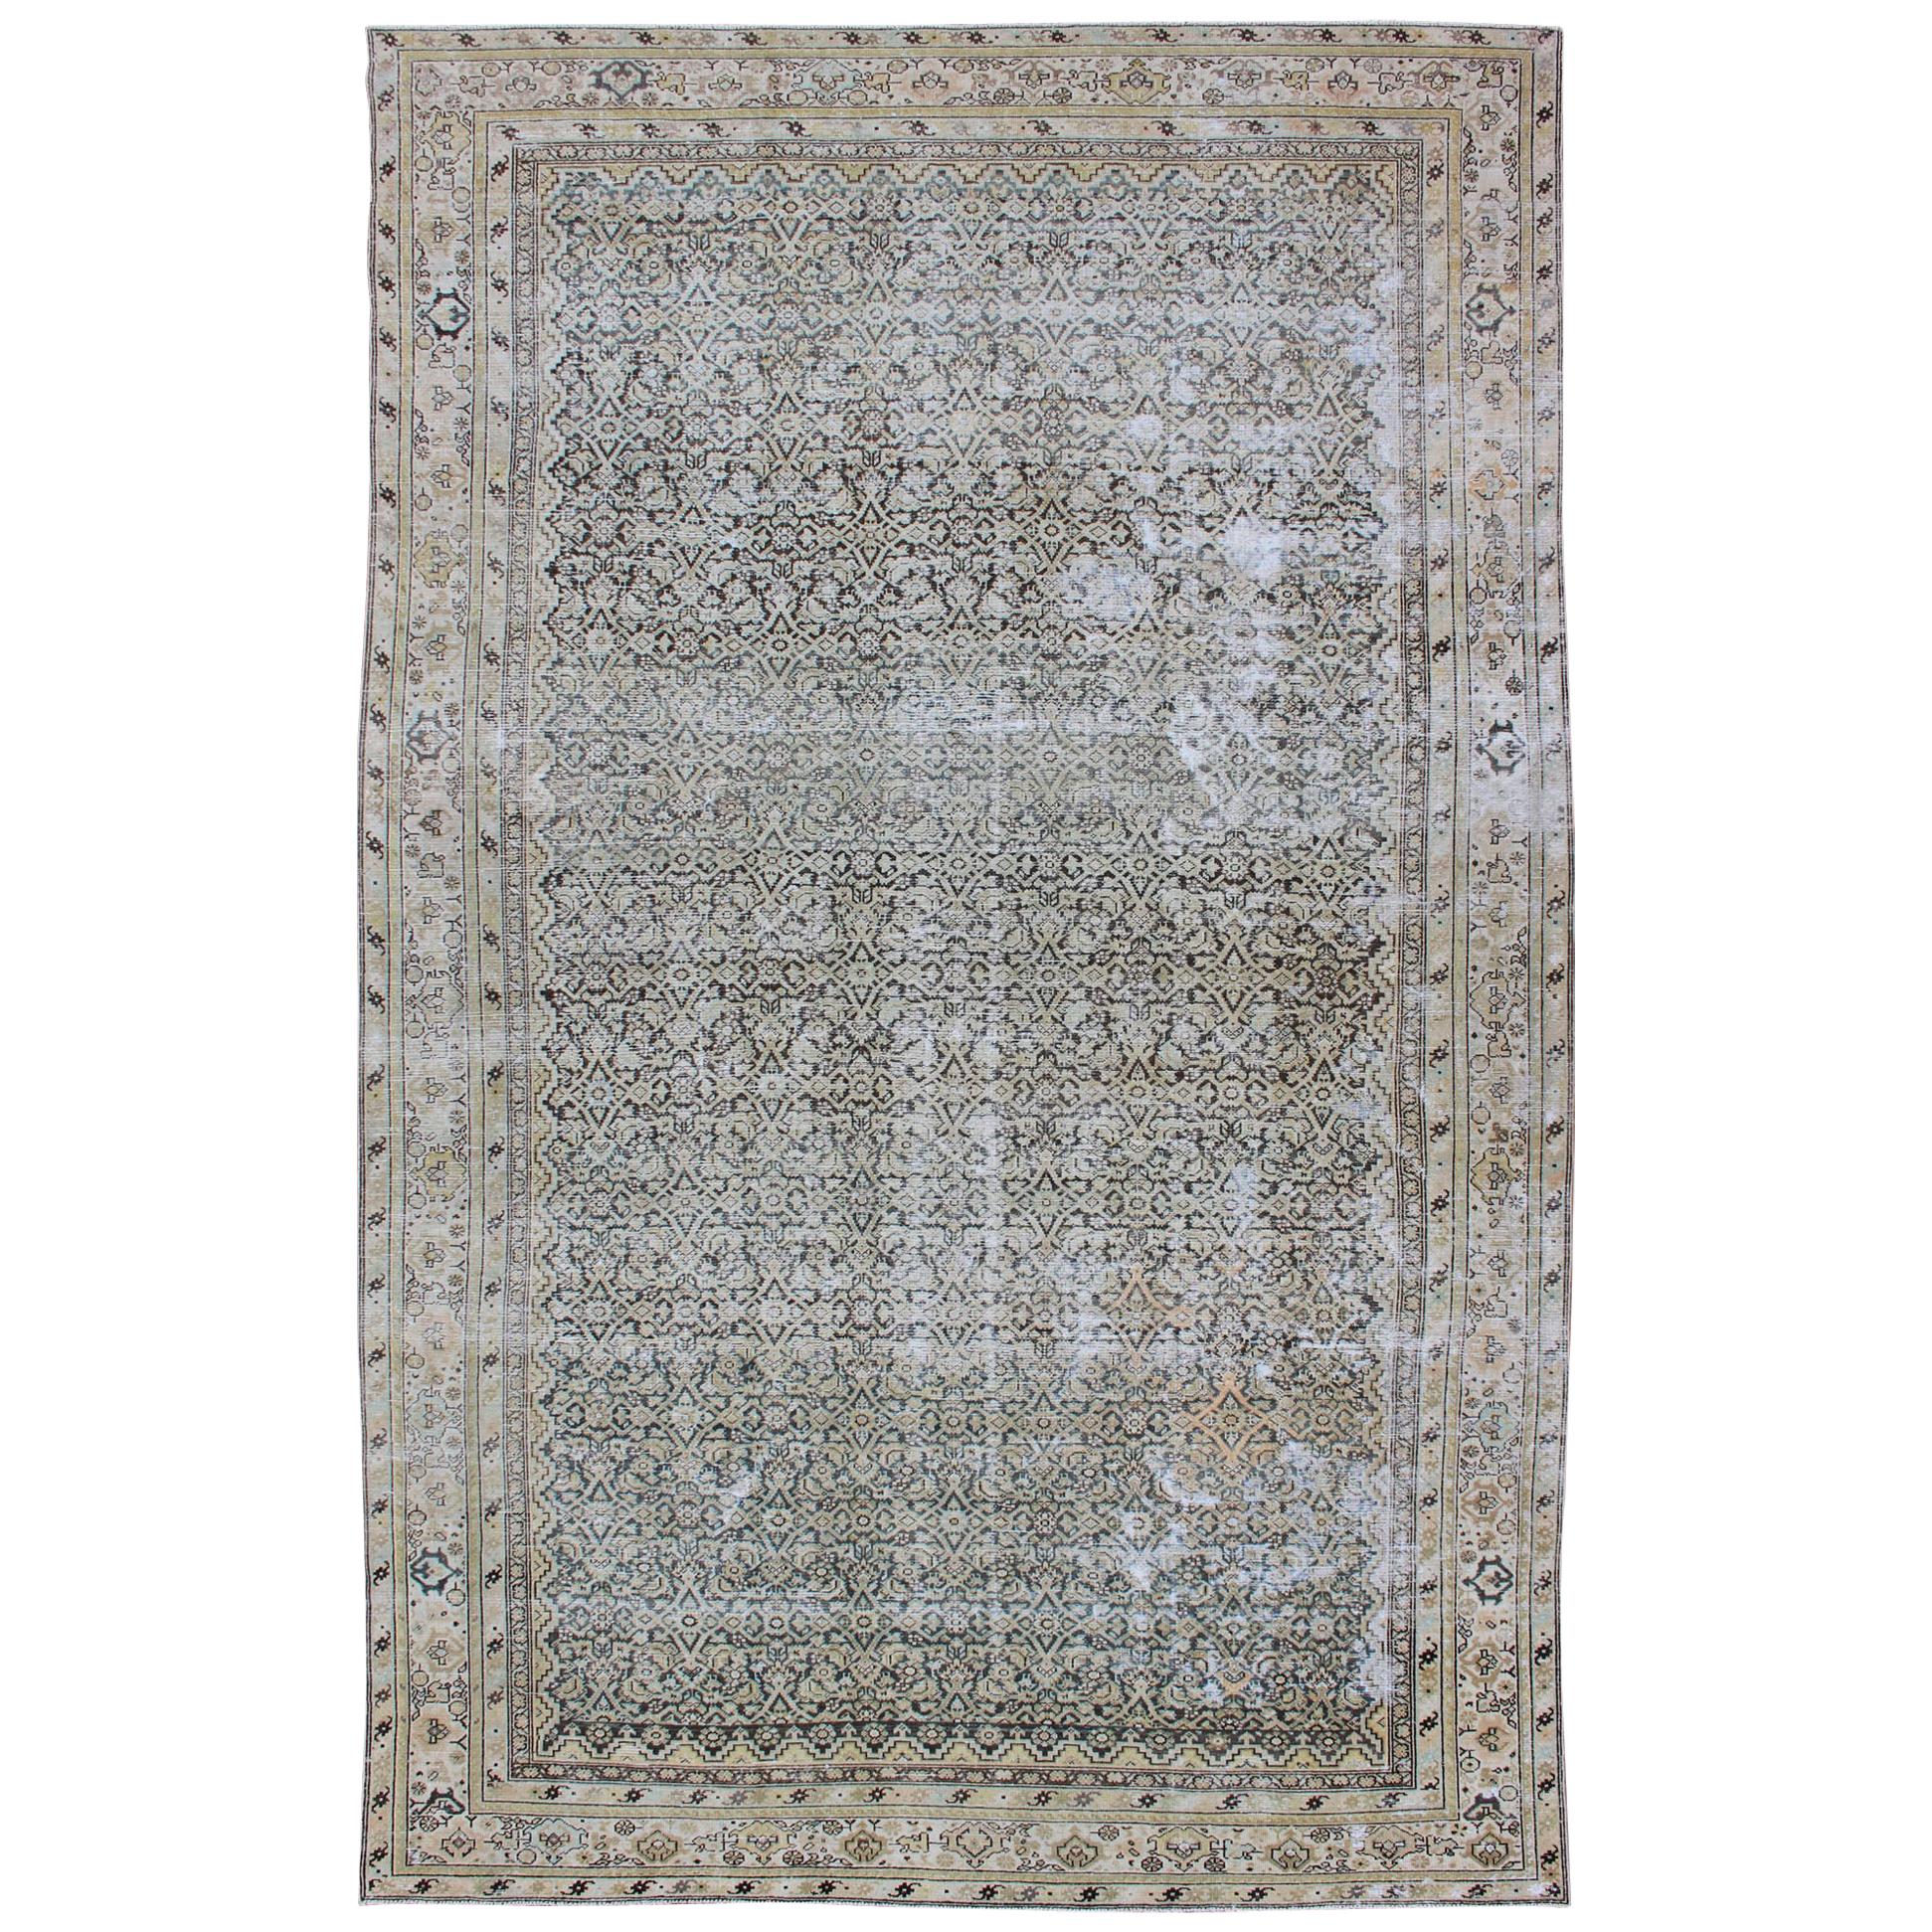 Large Gallery Persian Malayer Runner with Herati Design in Gray and Earth Tones